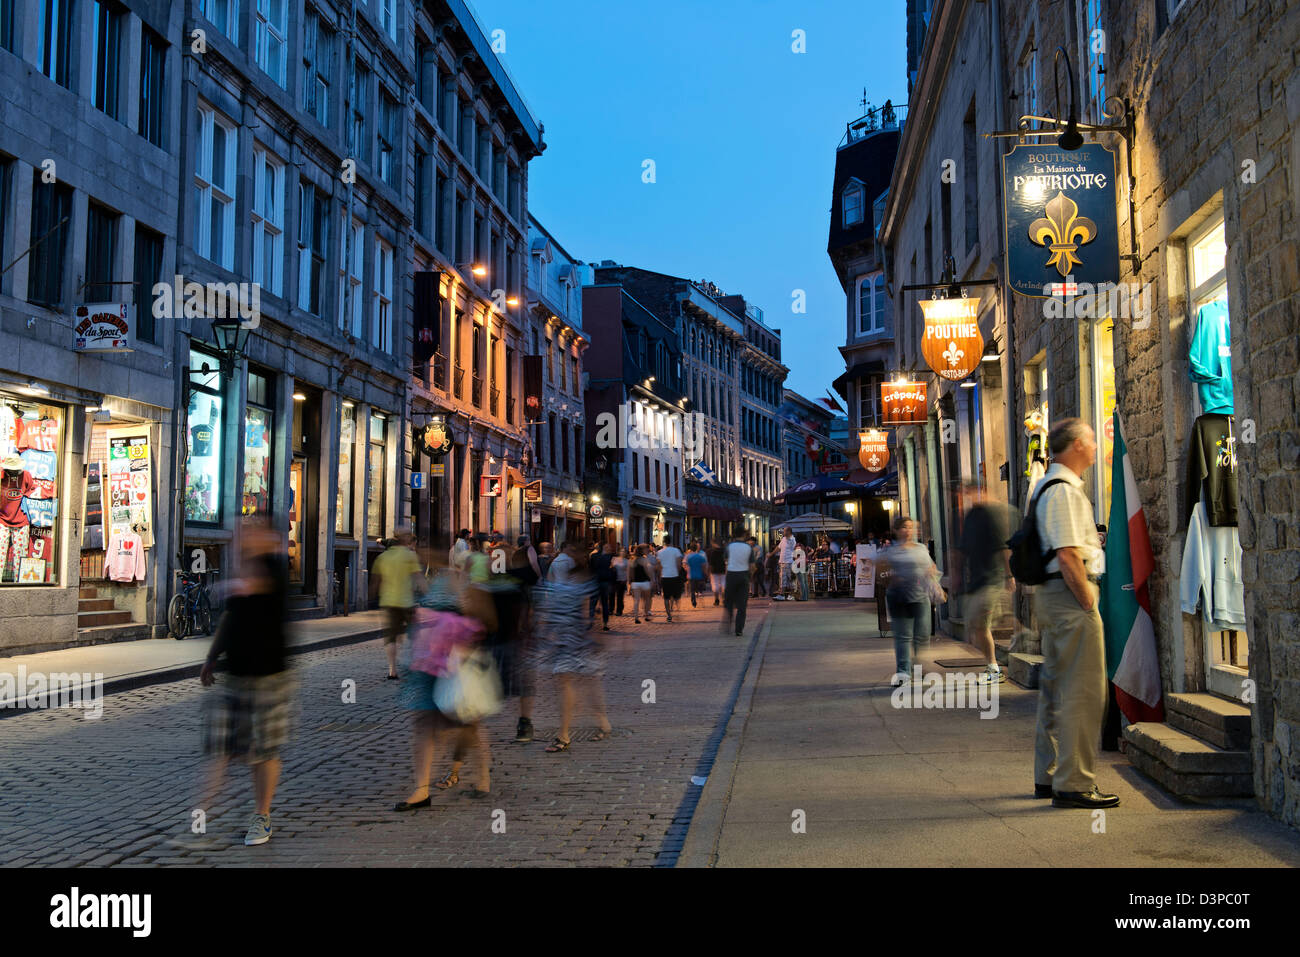 Tourists enjoying Rue Saint Paul Street in district of Old Montreal, Montreal, Quebec, Canada Stock Photo